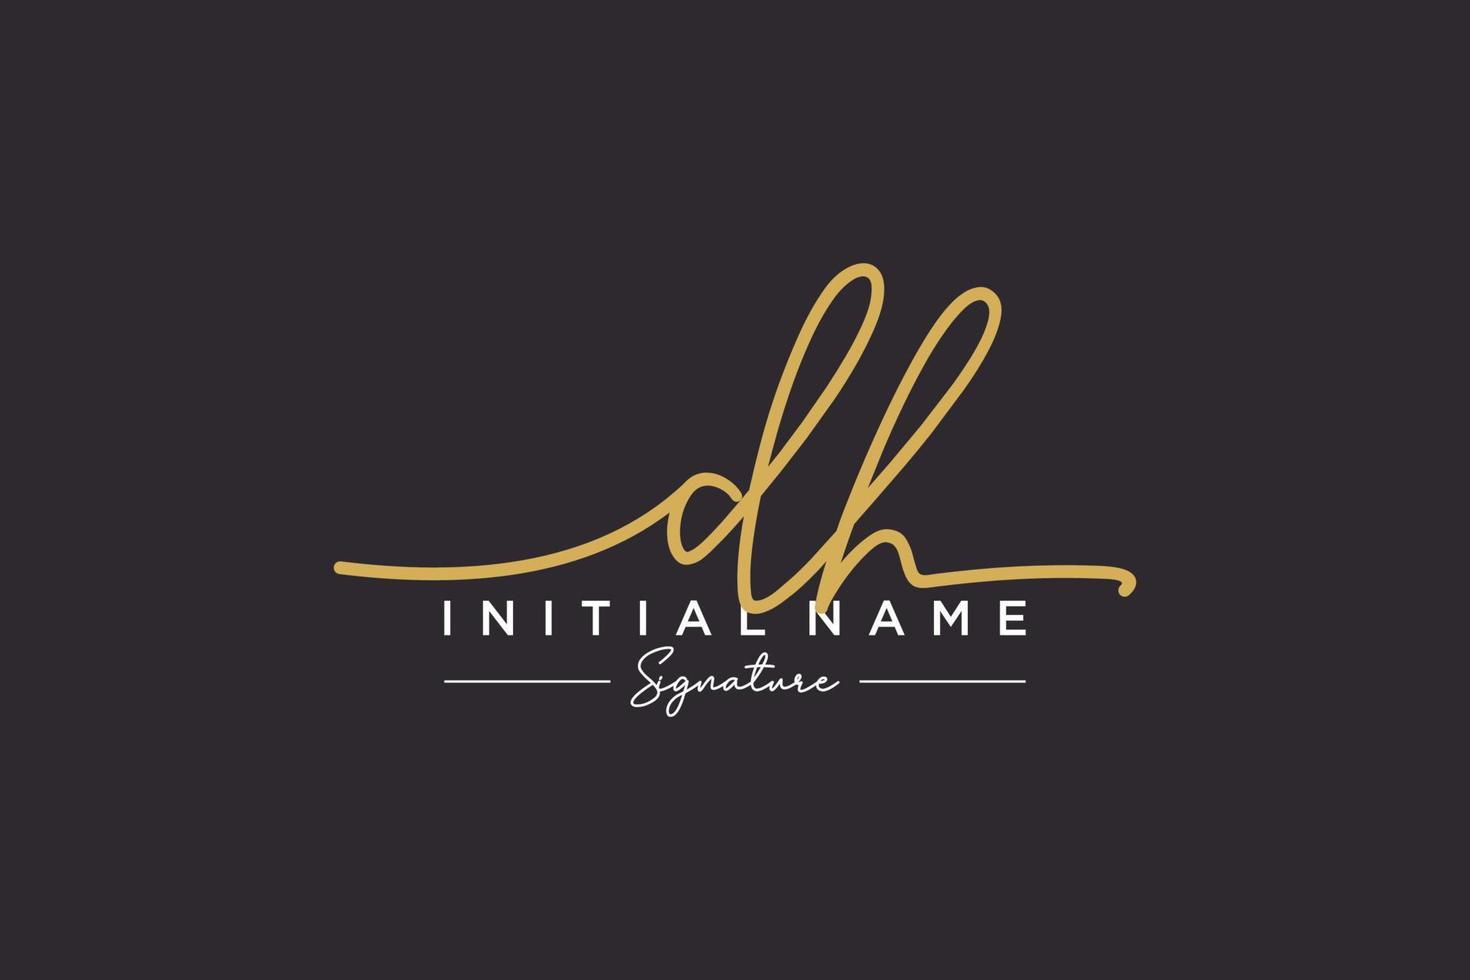 Initial DH signature logo template vector. Hand drawn Calligraphy lettering Vector illustration.